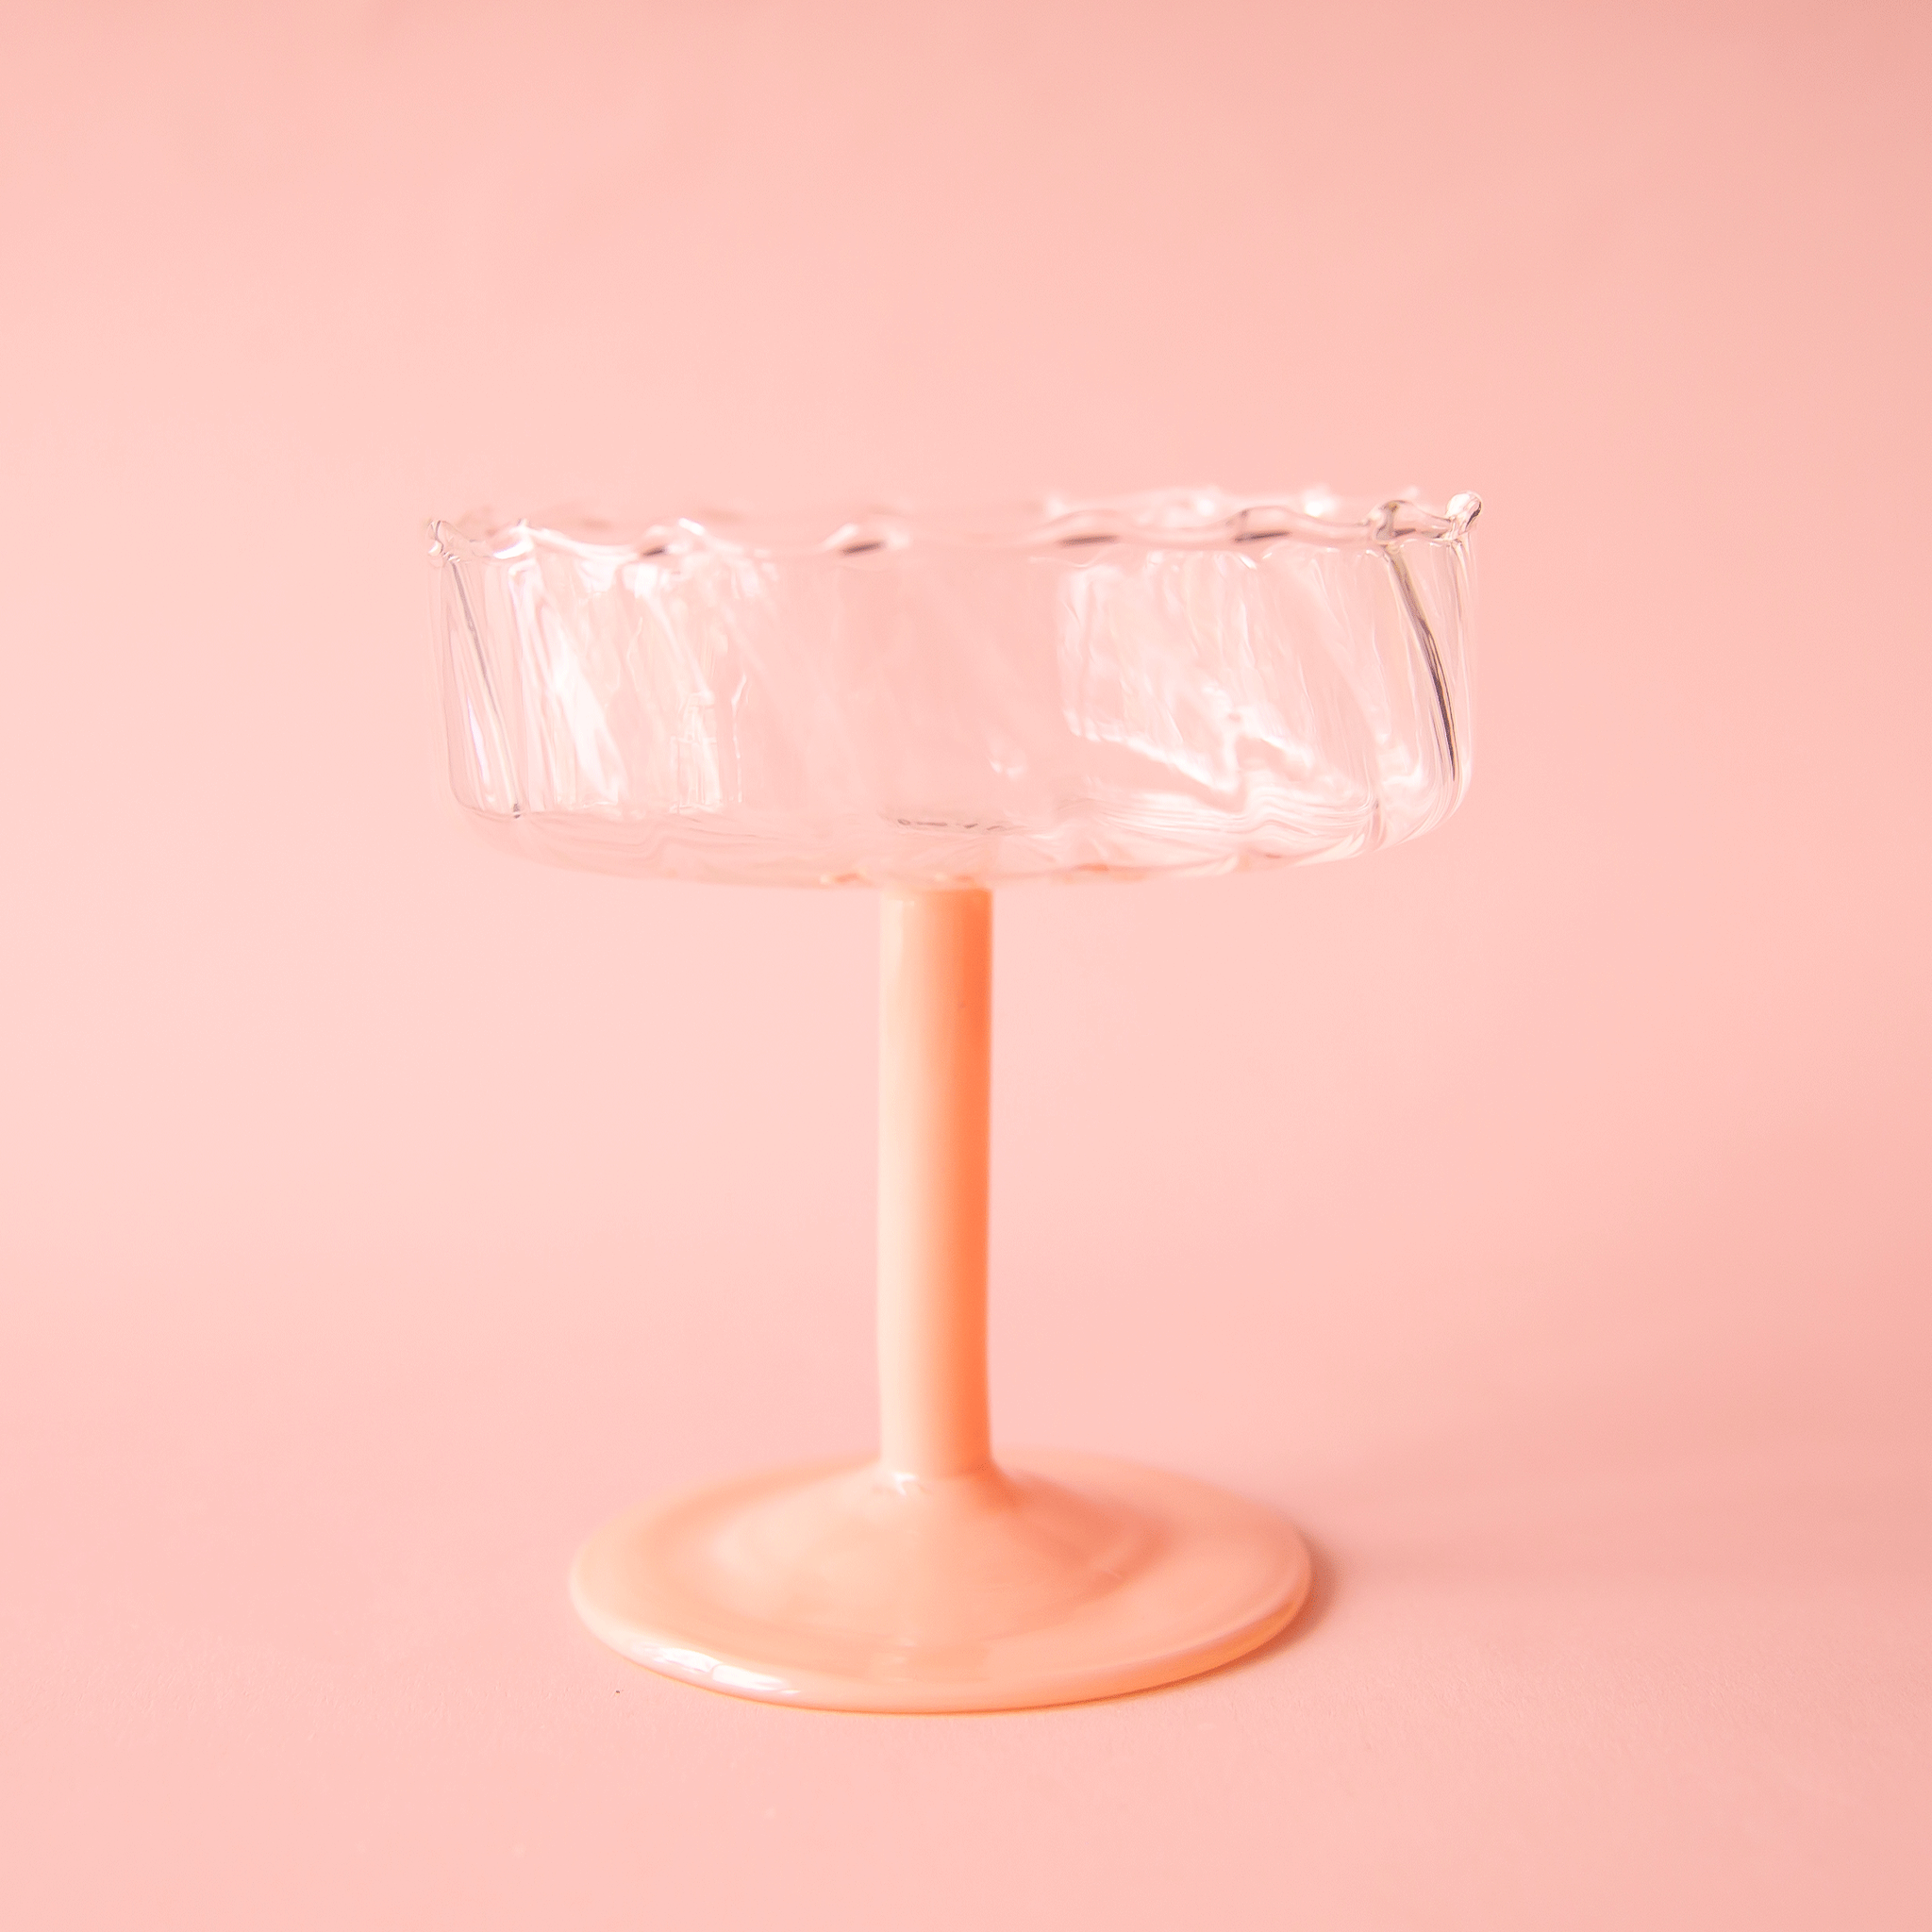 On a pink background is a wavy glass coupe with a pink stem.